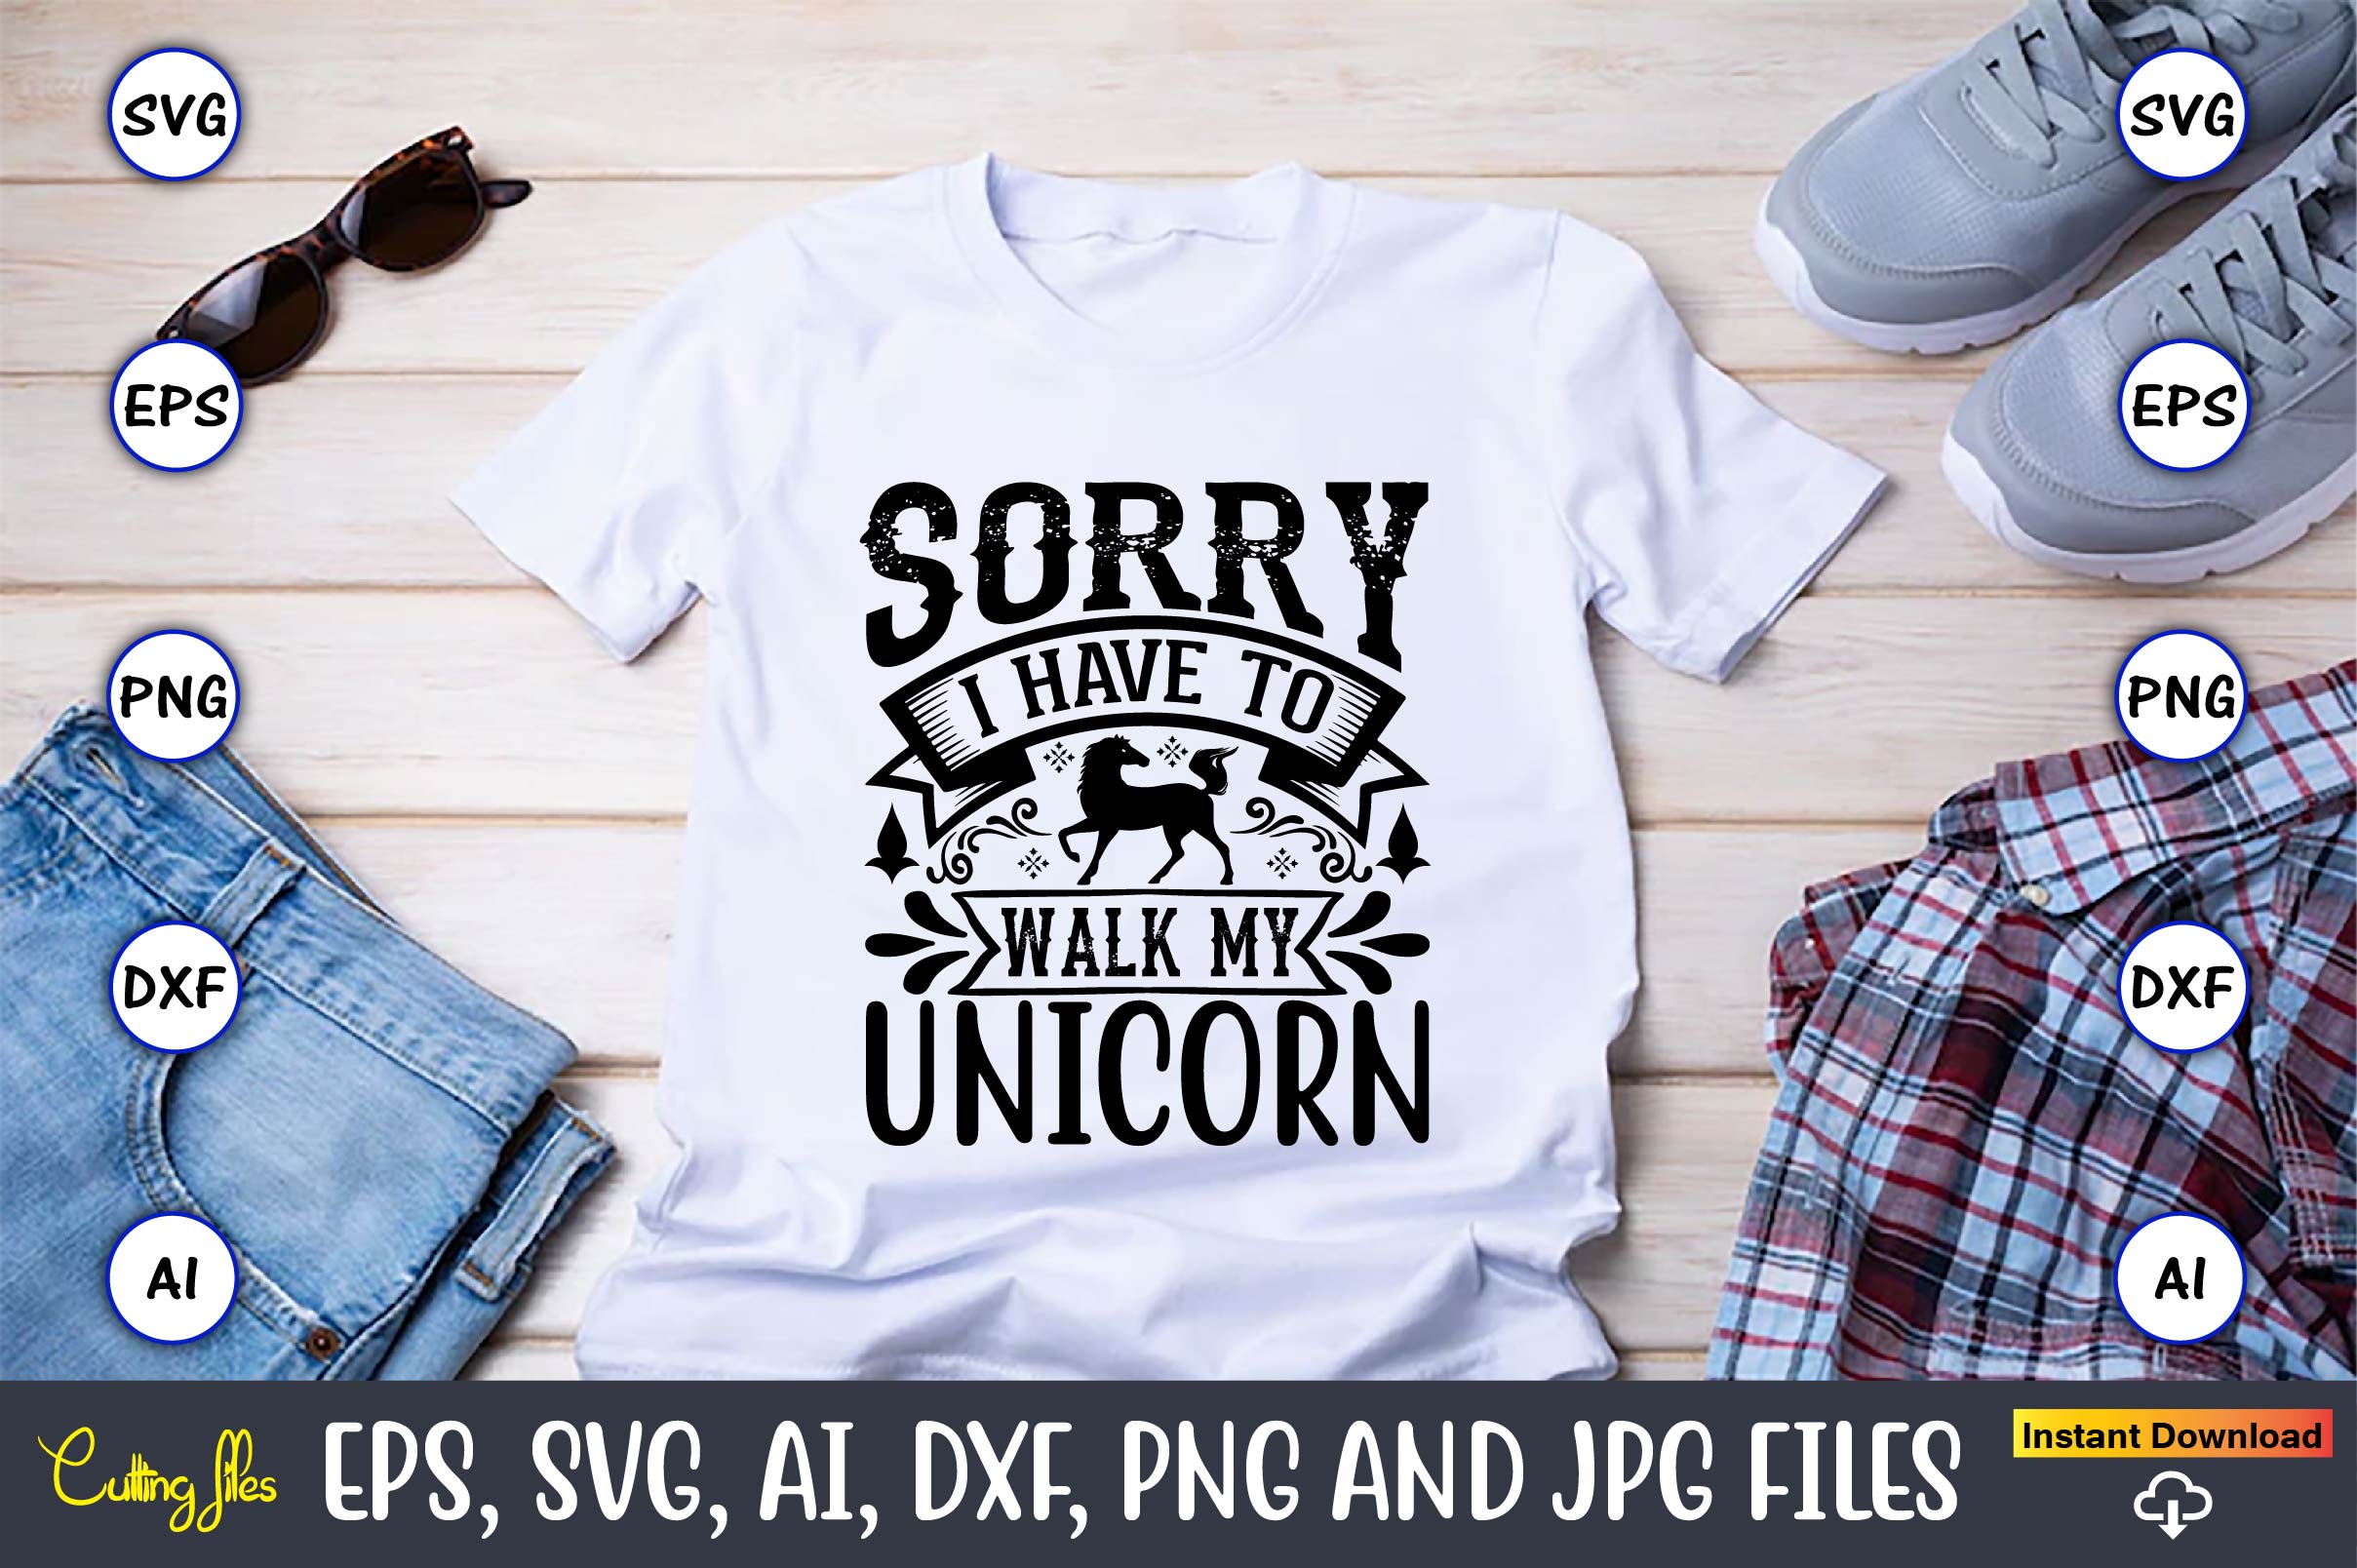 Image of a white t-shirt with a unique slogan Sorry i have to walk my unicorn.